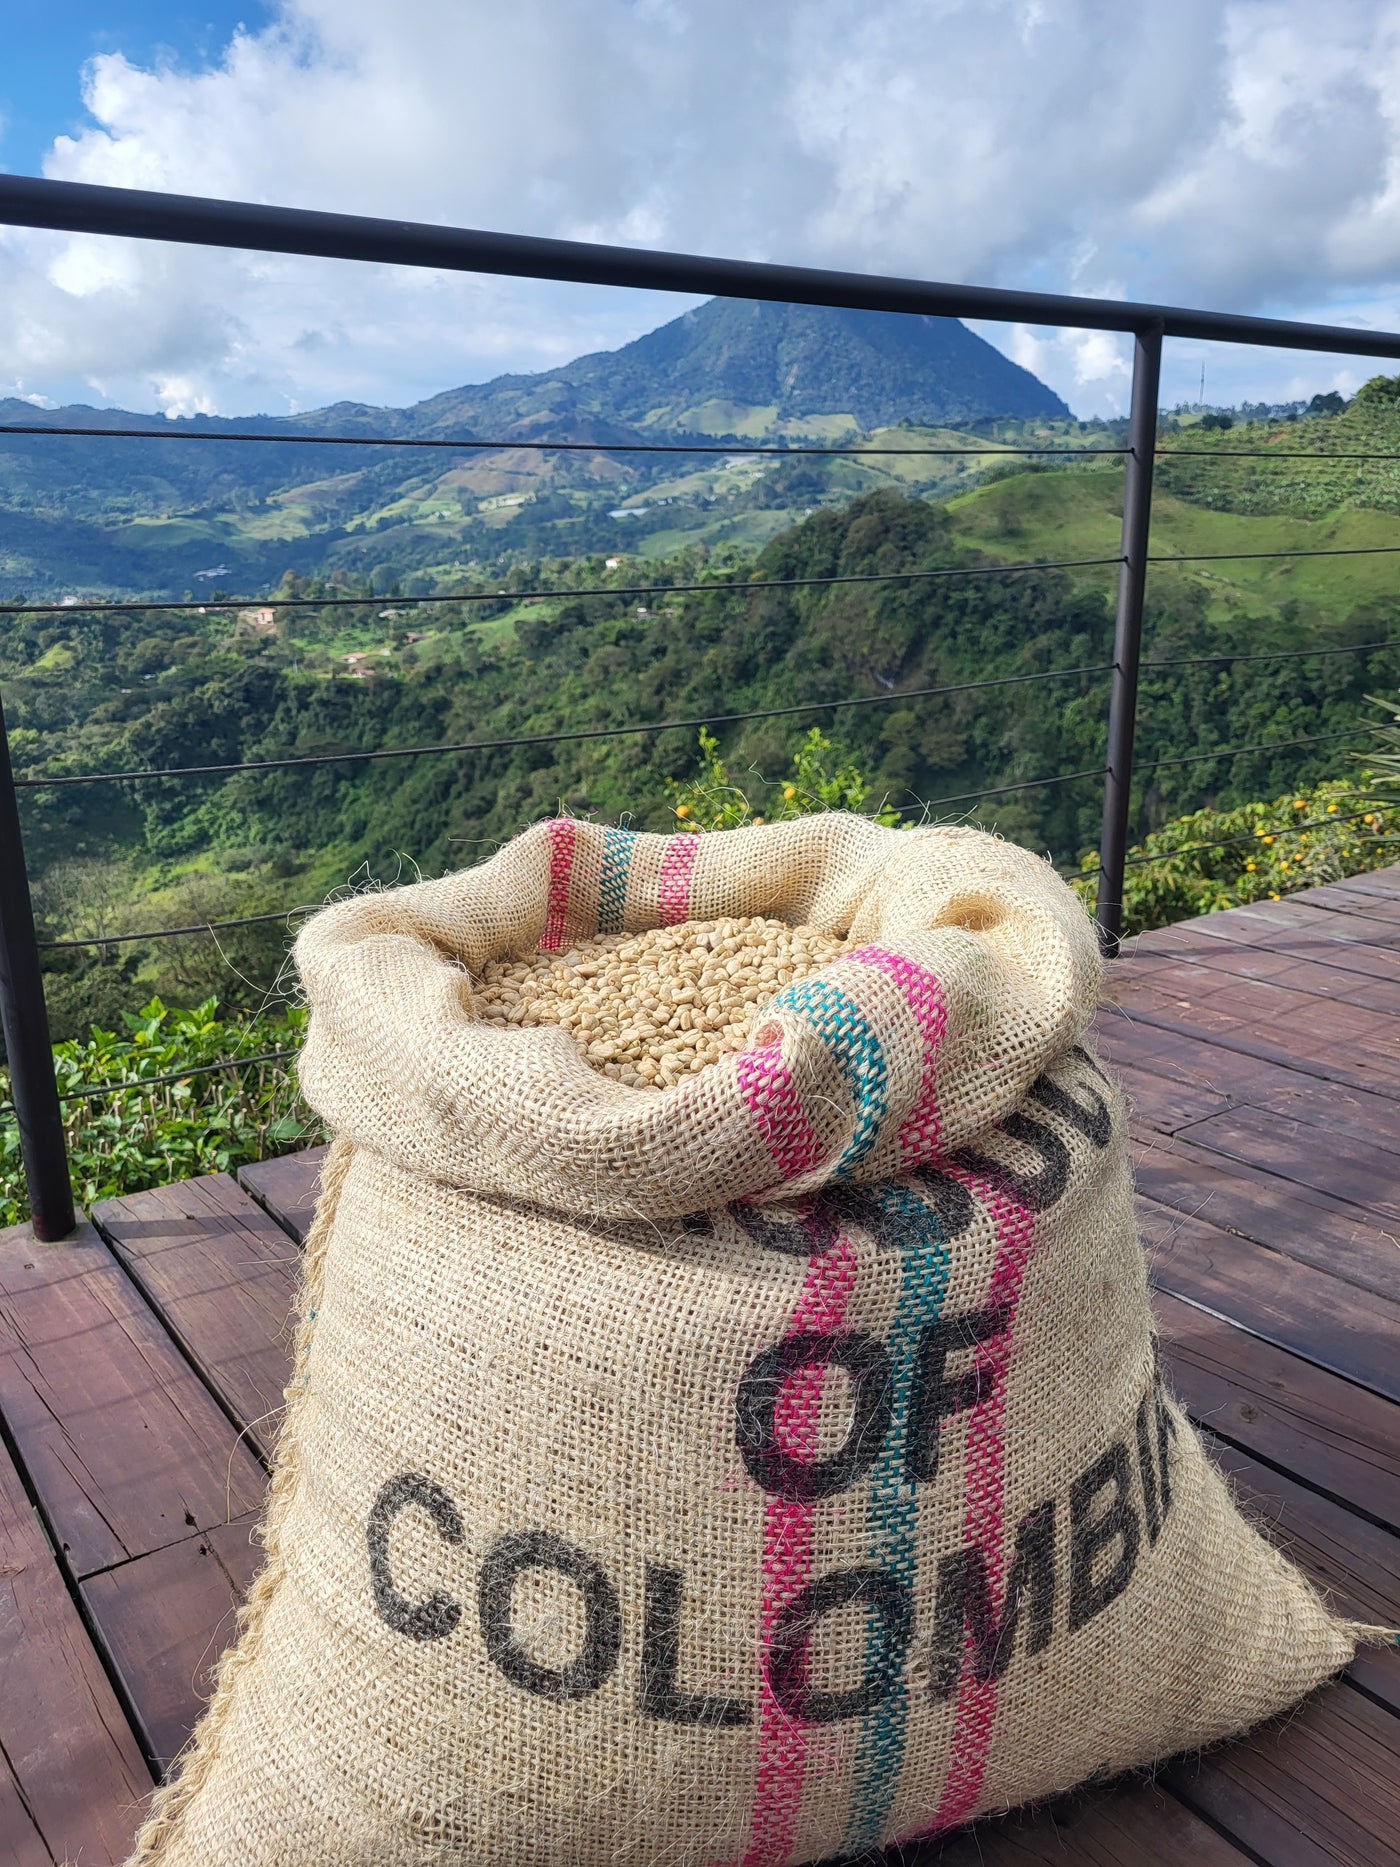 Specialty vs. Commercial Colombian Coffee